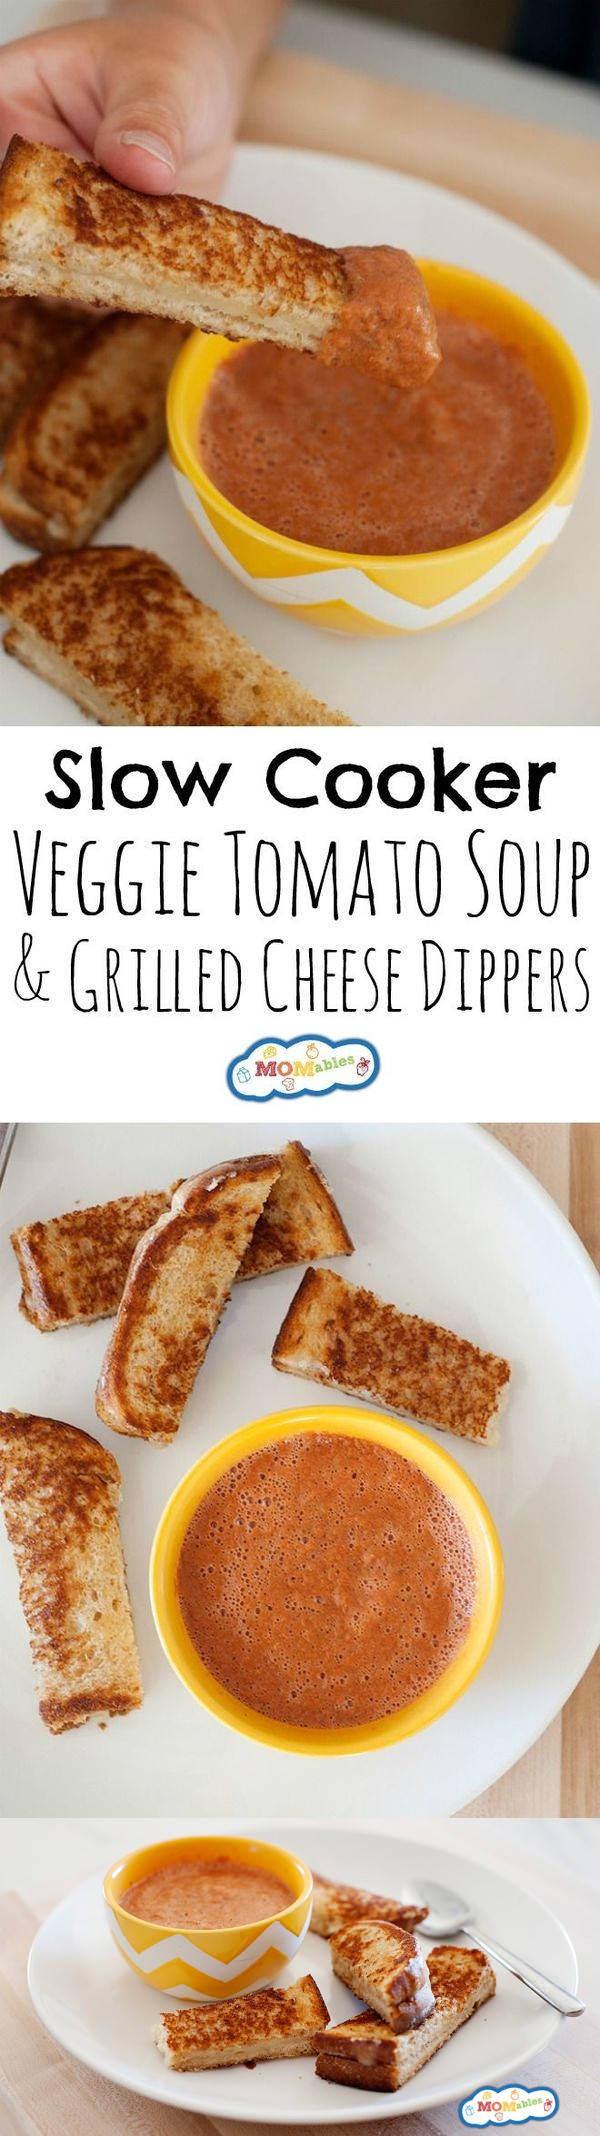 Slow Cooker Veggie Tomato Soup and Grilled Cheese Sticks